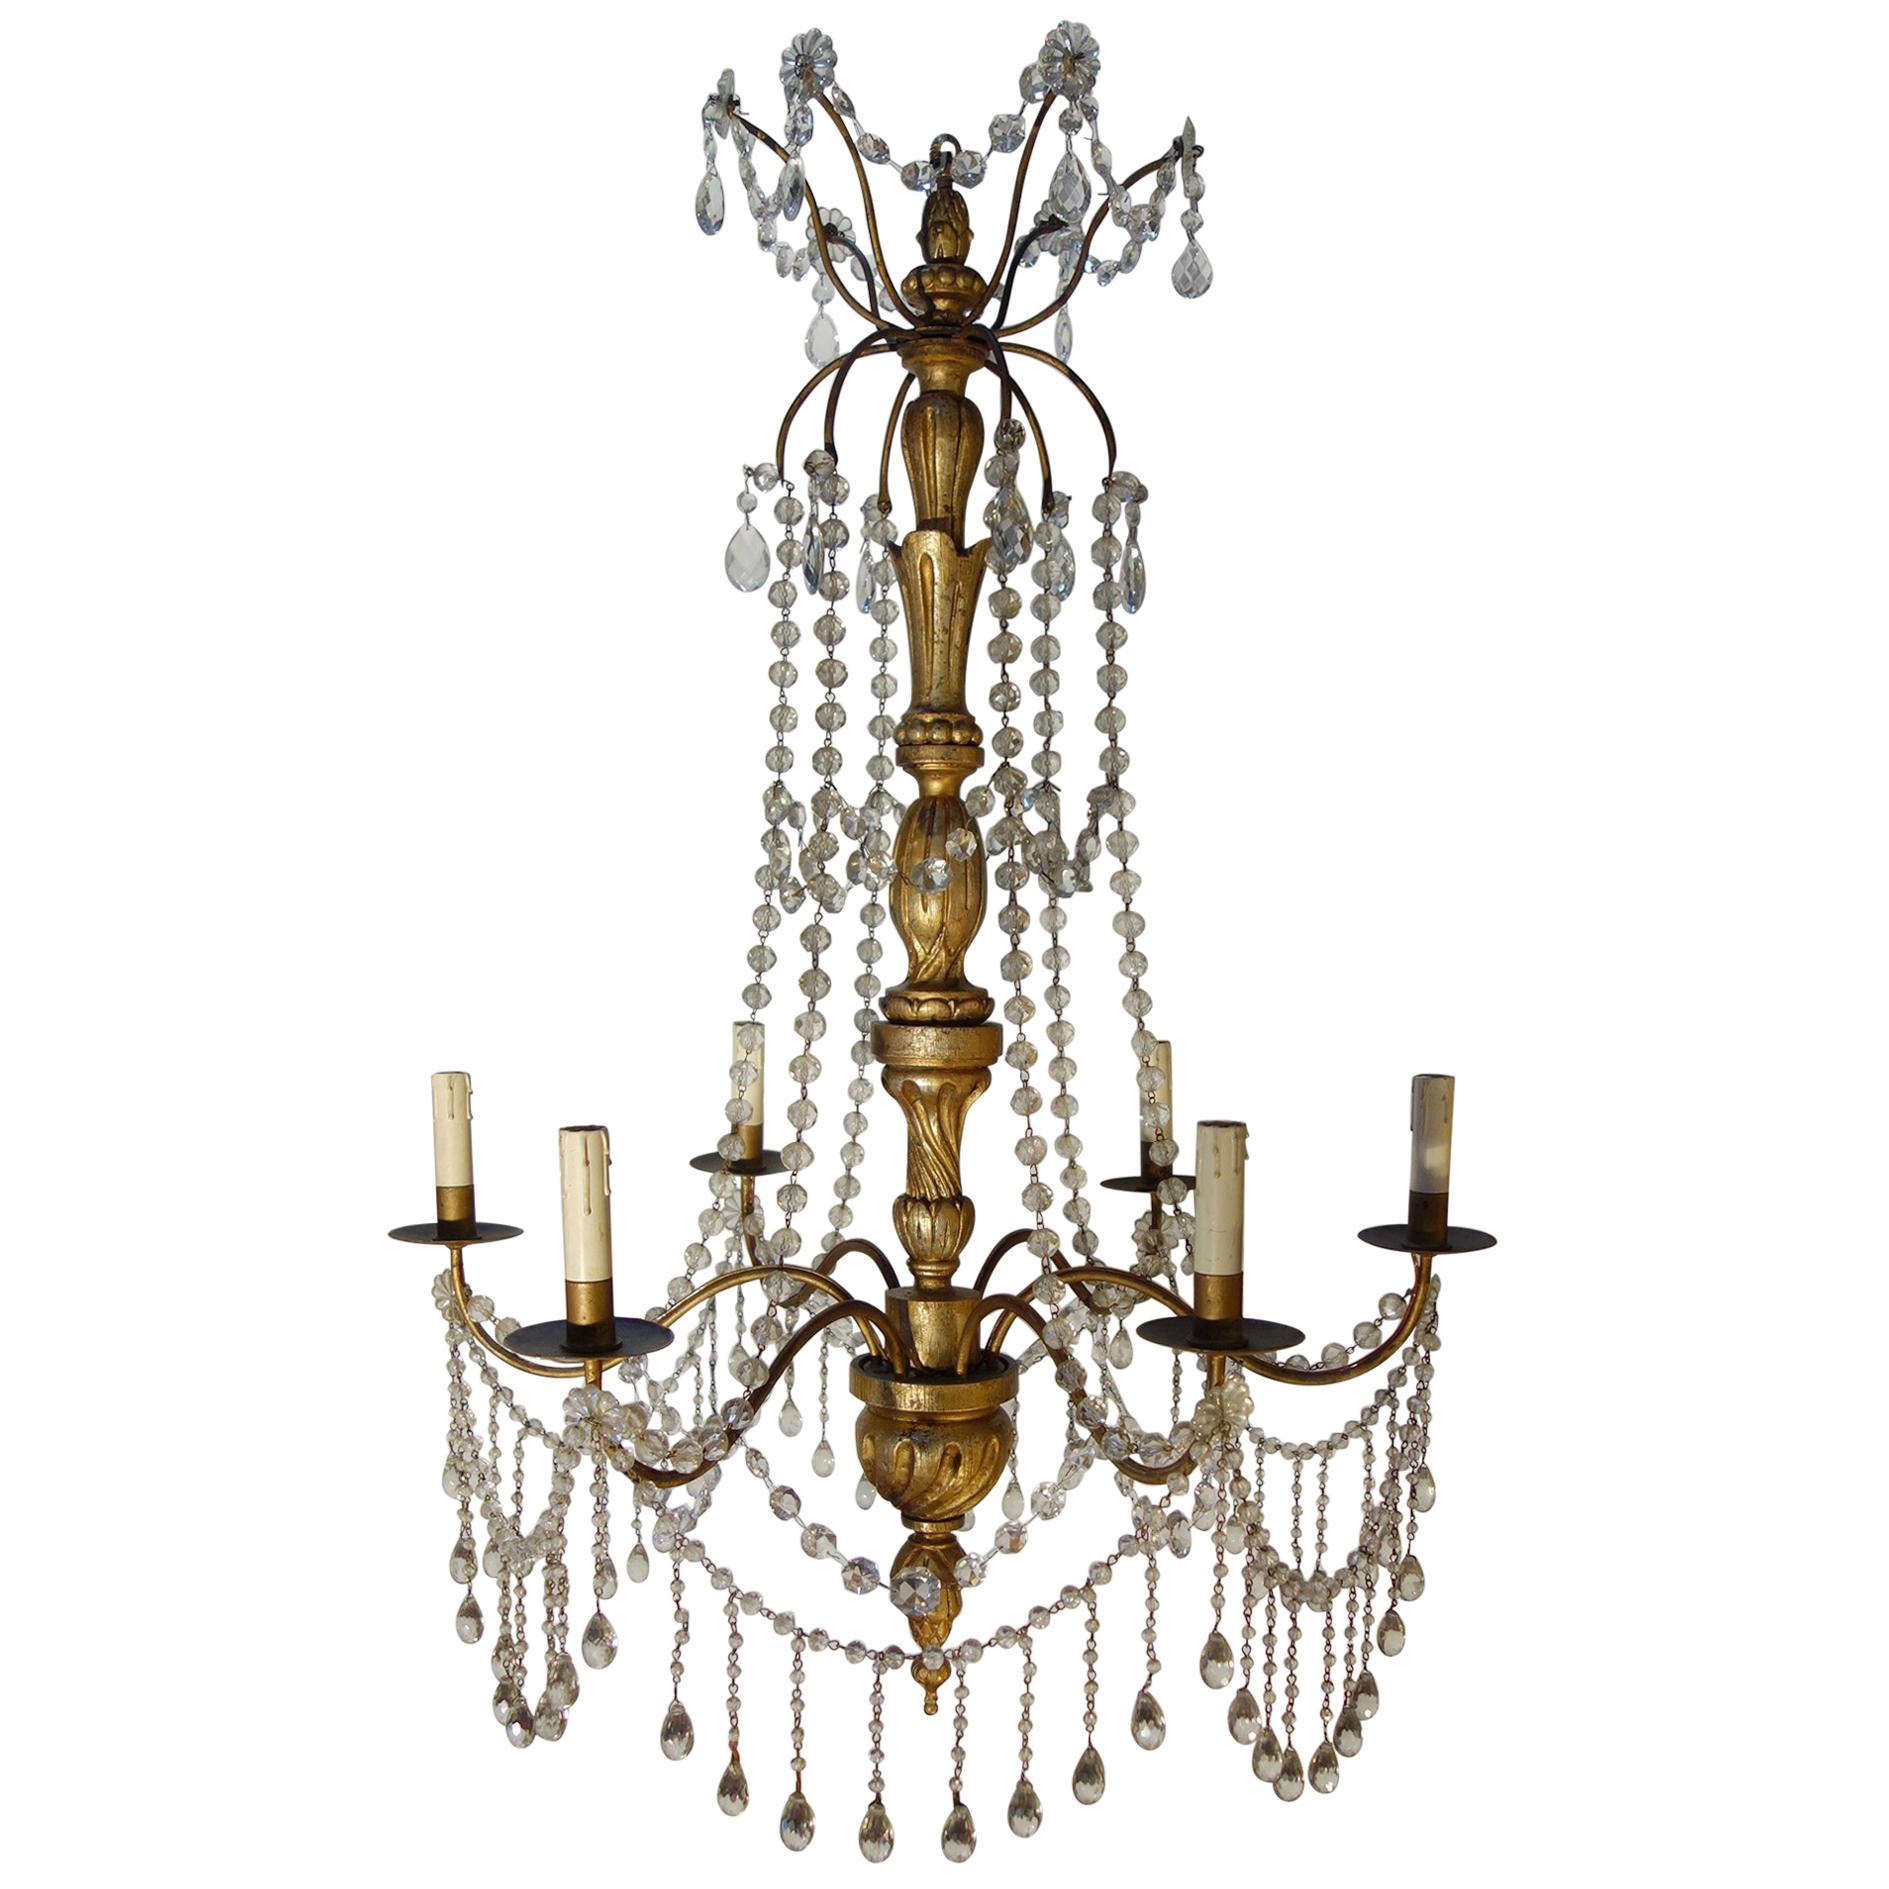 Vintage Italian Gold Painted Genova Chandelier with Cut Glass Drops and Strands For Sale